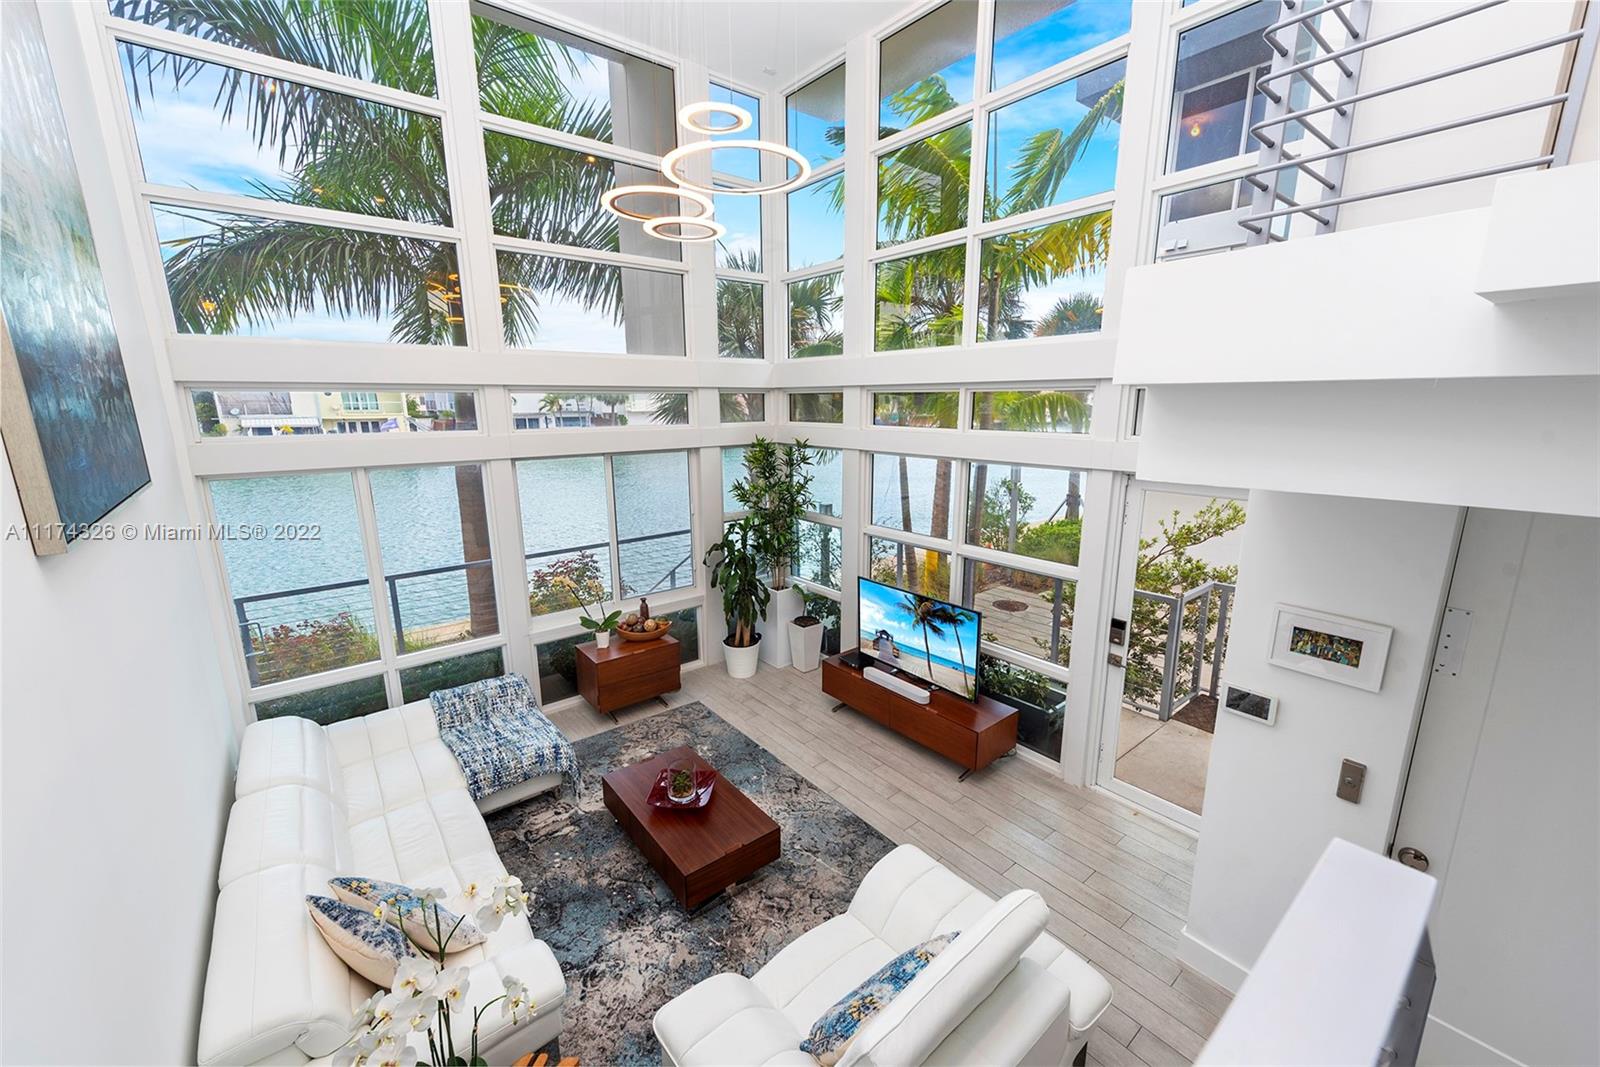 Stunning waterfront Townhouse at Iris on the Bay, a gated community in Miami Beach. Unique corner unit, 3 bedrooms and 3.5 bathrooms w/ breathtaking water views throughout. Built in 2018, this home is ready to move in! A total of 2,626 SF of indoor & outdoor space w/private elevator. The 18ft ceilings give the entry and living room space a WOW effect. Gourmet kitchen w/custom cabinets & pantry, GE Profile appliances & Gas stove. Second master bedroom features a impressive Walking Closet. Master bedroom opens to a private roof top terrace w/summer kitchen and incredible water views. Impact windows & doors, electric blinds, custom closets. 2 car garage, electric car terminal. Across from Fairway Park w/tennis & Golf. Walk to Beach & restaurants. Low HOA fees. A true gem!